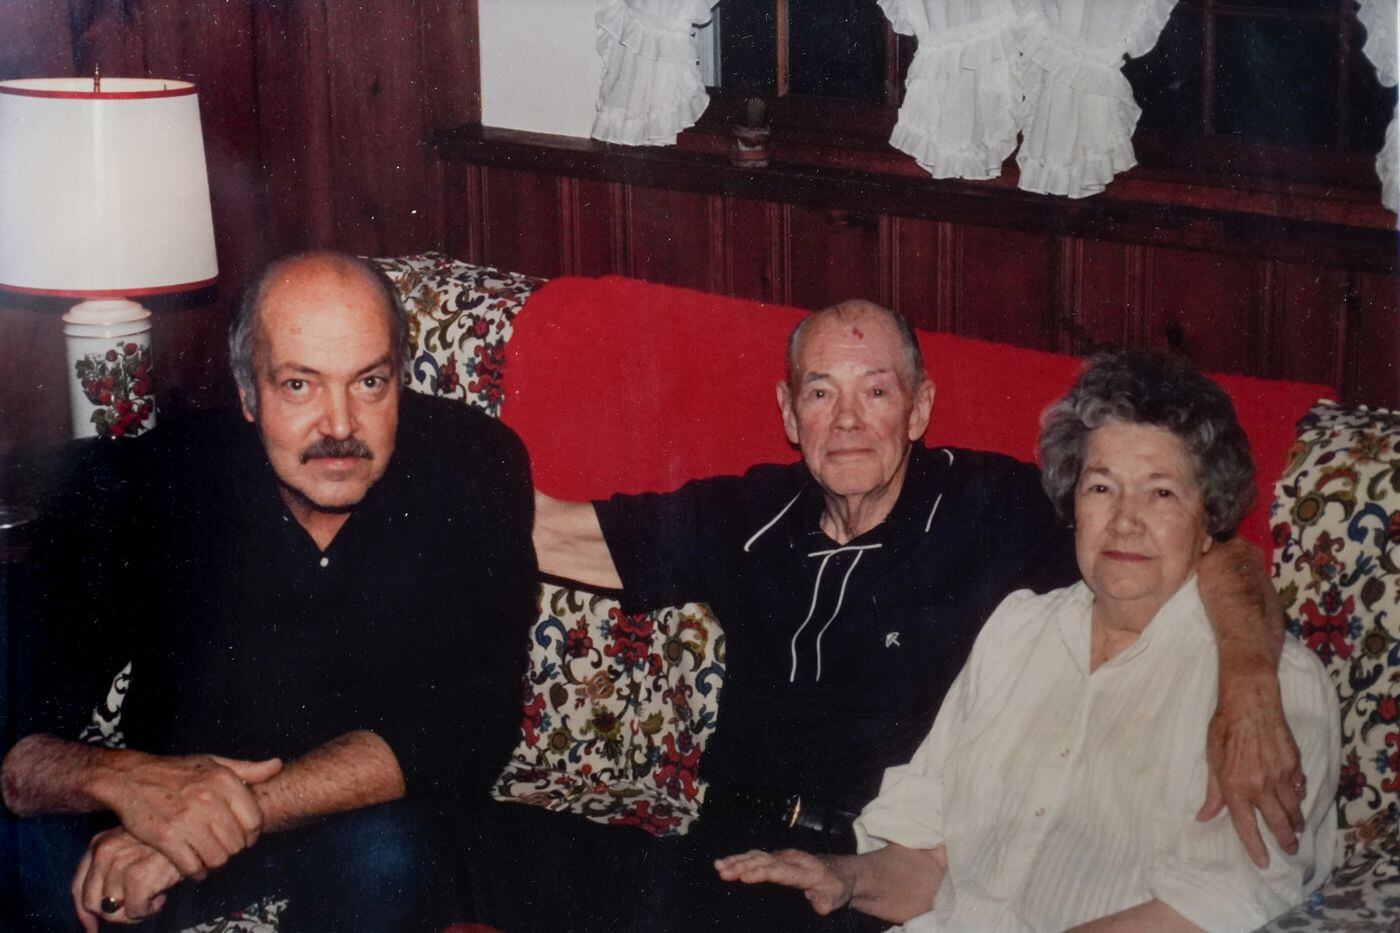 Richard Brian, center, sits with his sister, Mary Caffrey, right, shortly after the siblings reunited in the early 1980s. They spent nearly 50 years apart after he left Trenton for California and they lost track of each other during the Great Depression. At left is Caffrey’s son, William Caffrey.